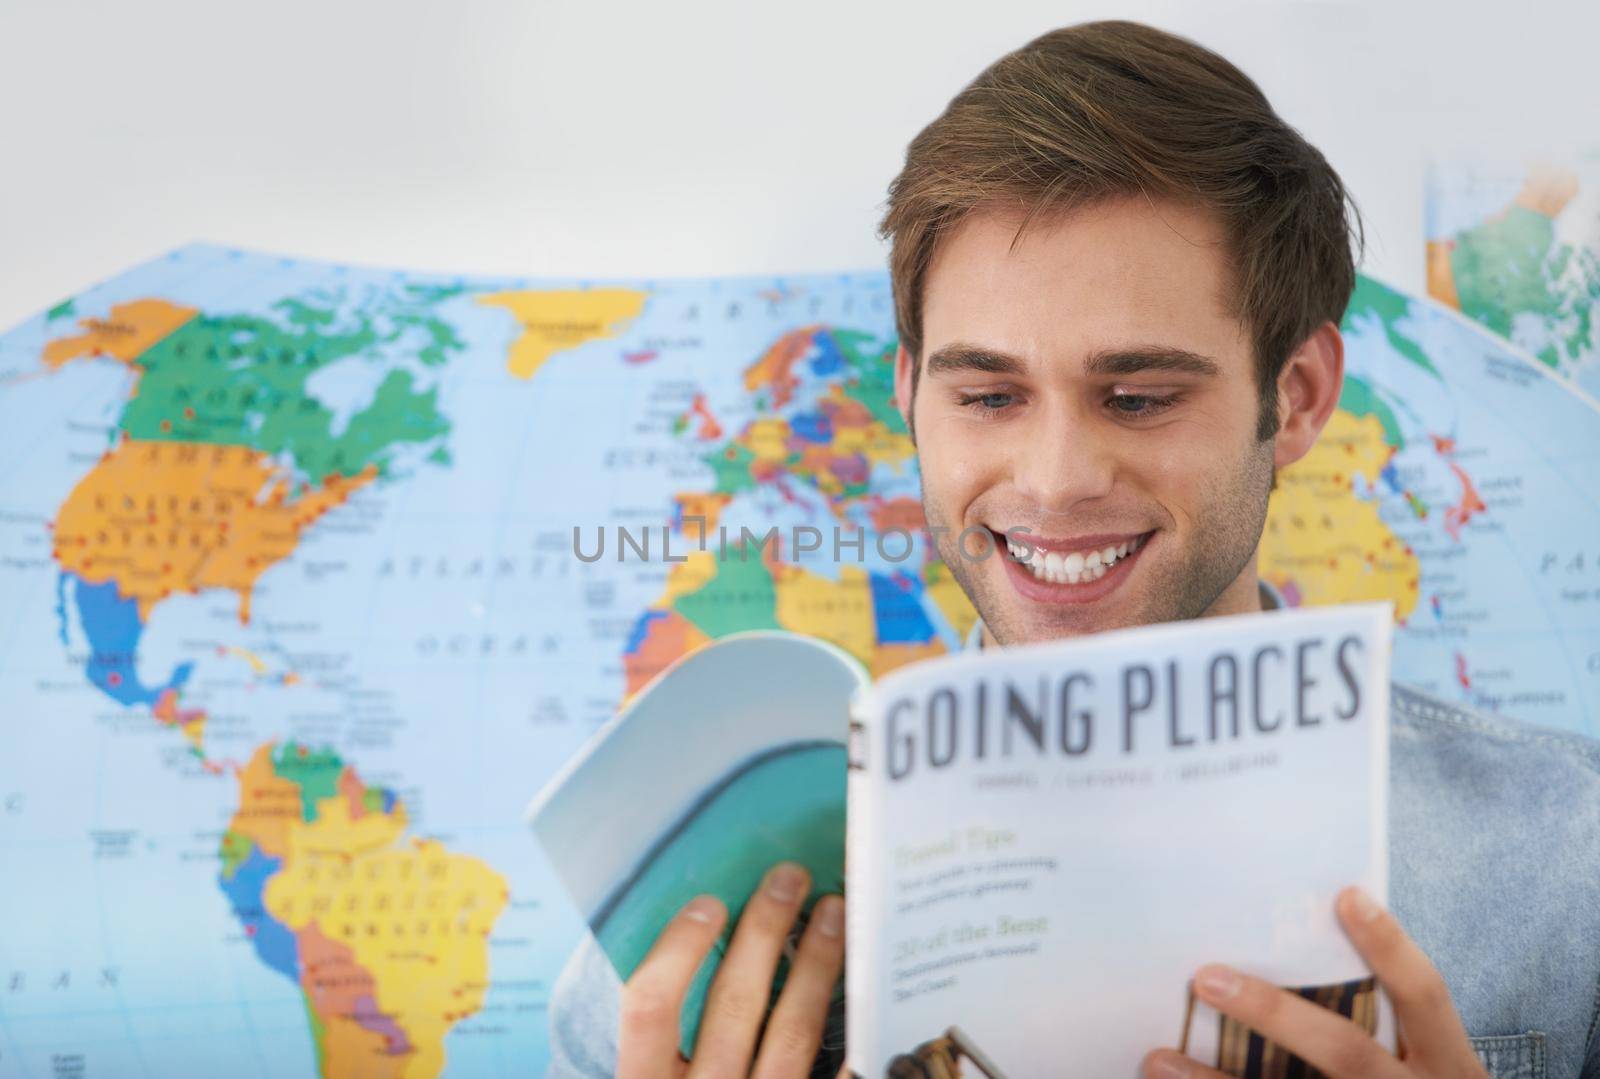 Dreaming about traveling. A young man reading a travel magazine